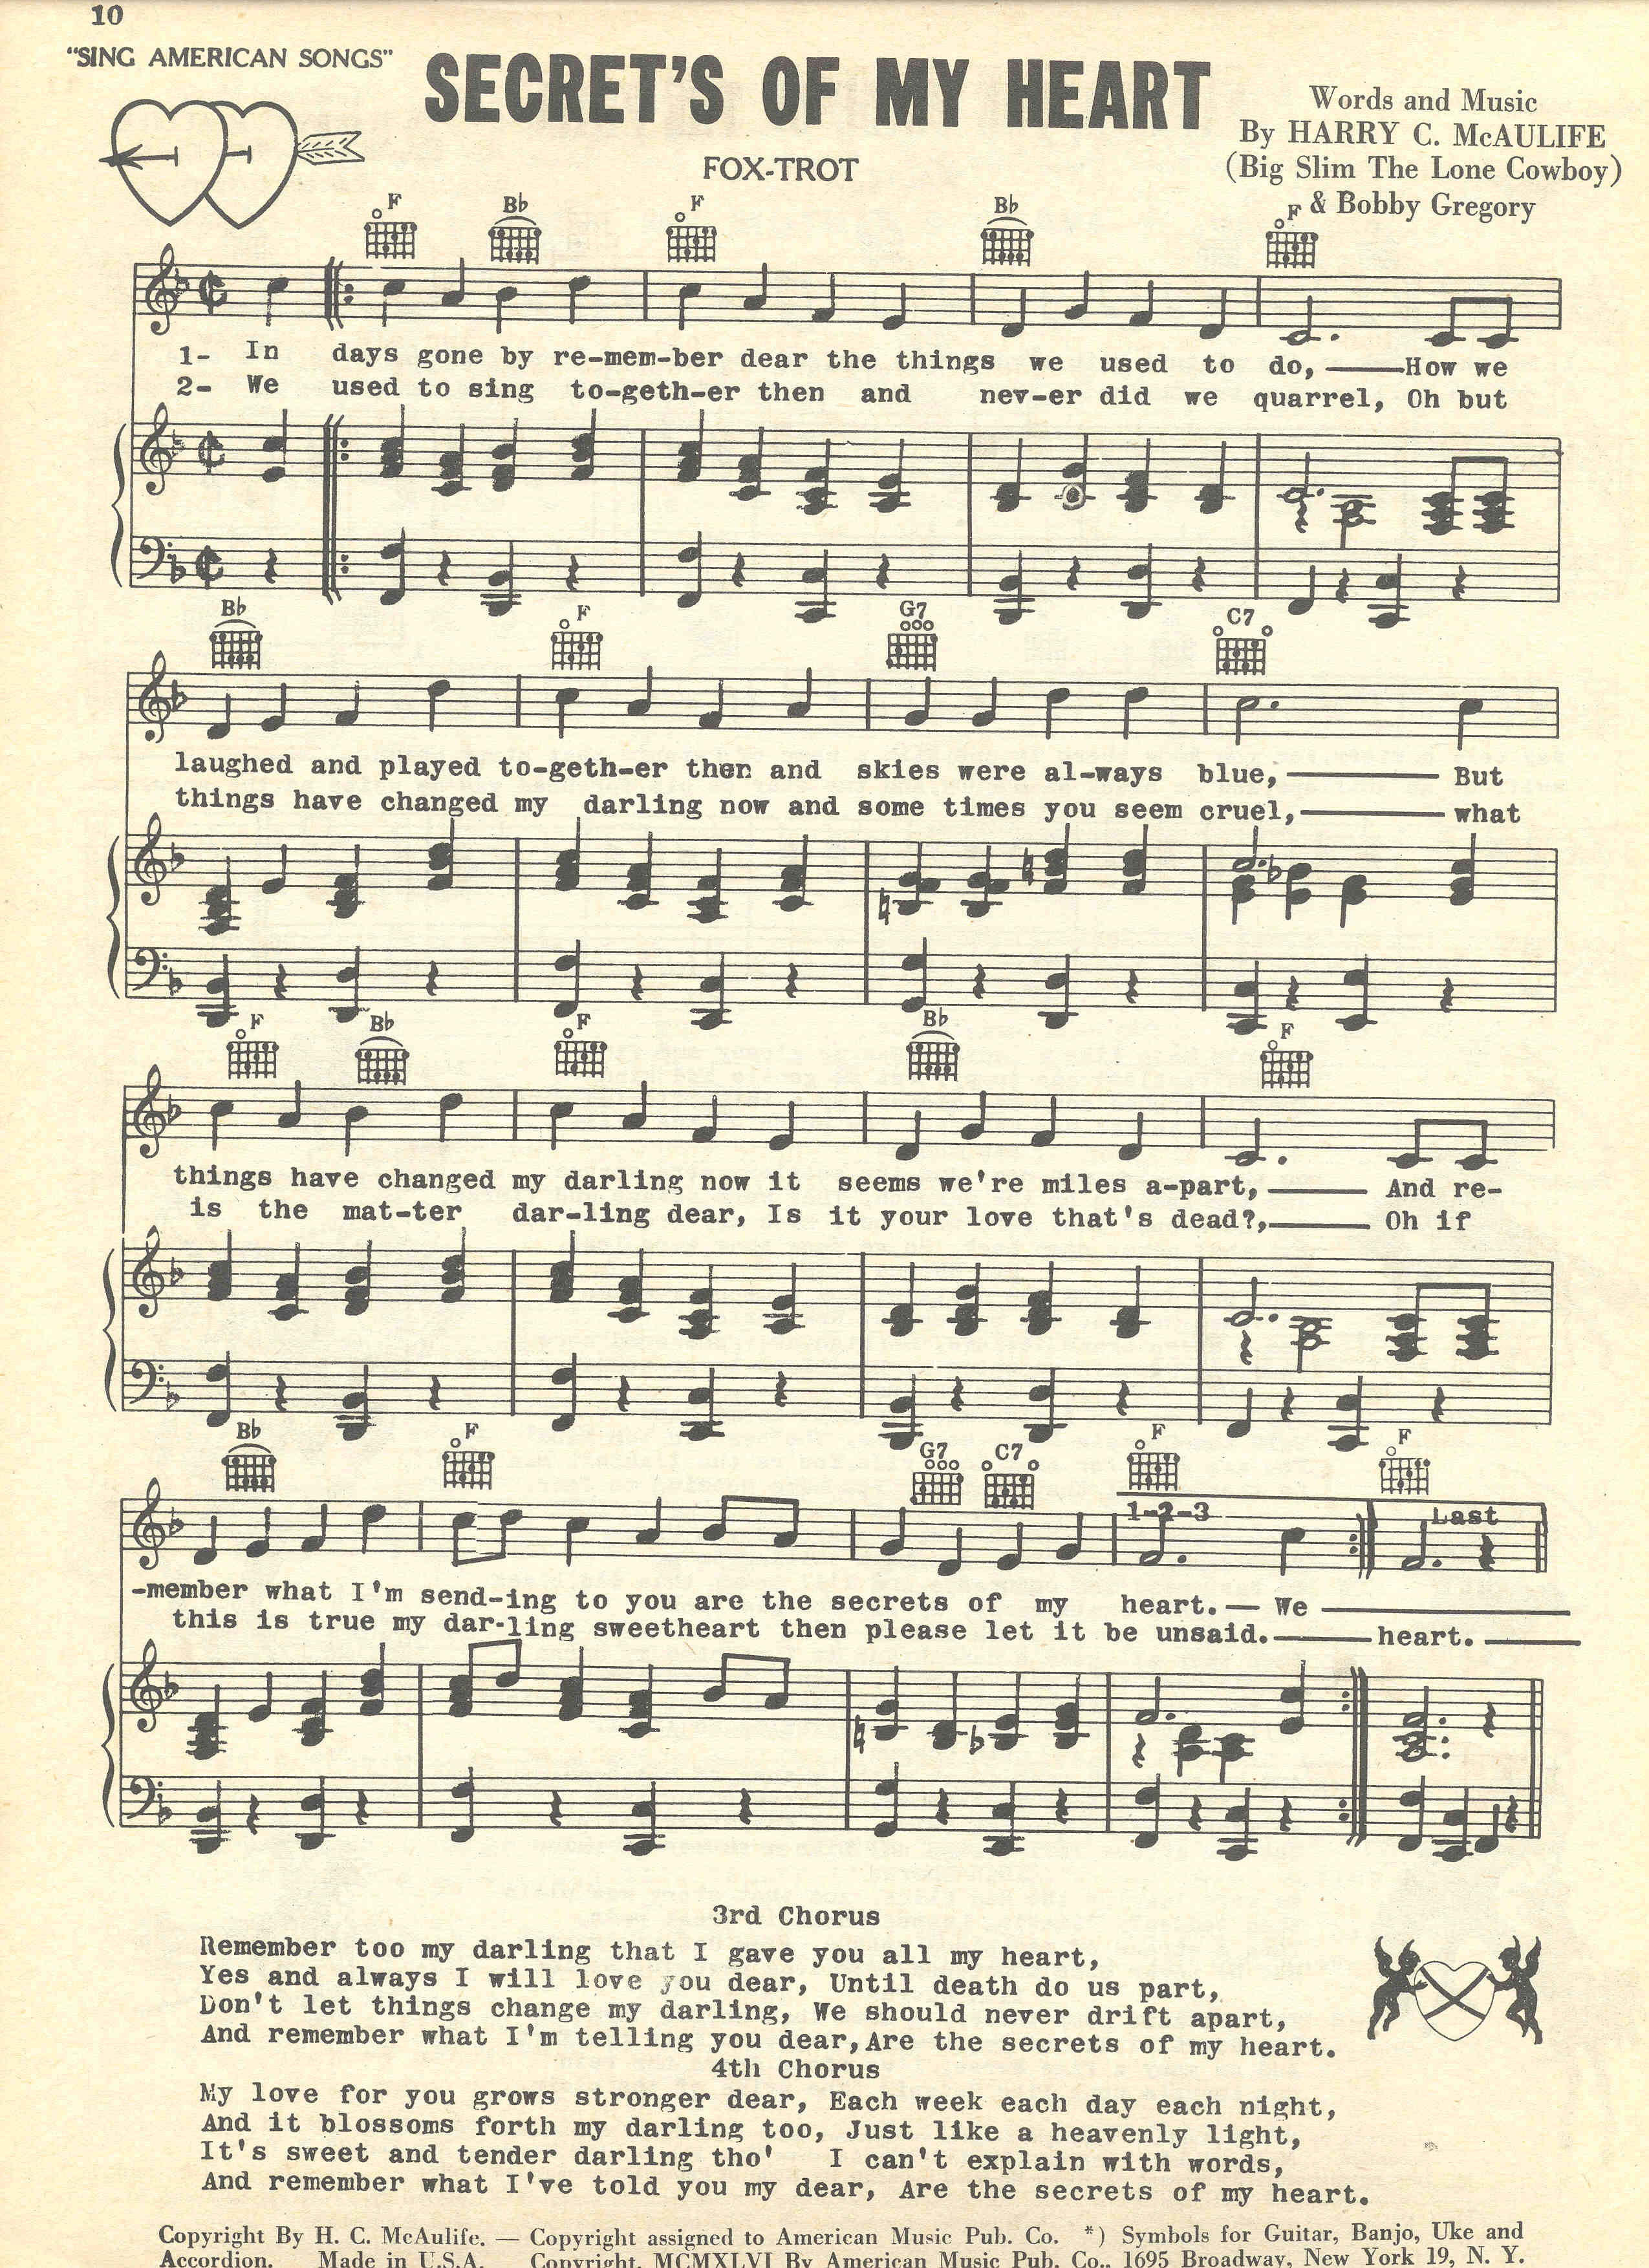 FL247_Heart_Southern Folklife Collection Song Folios (#30006)